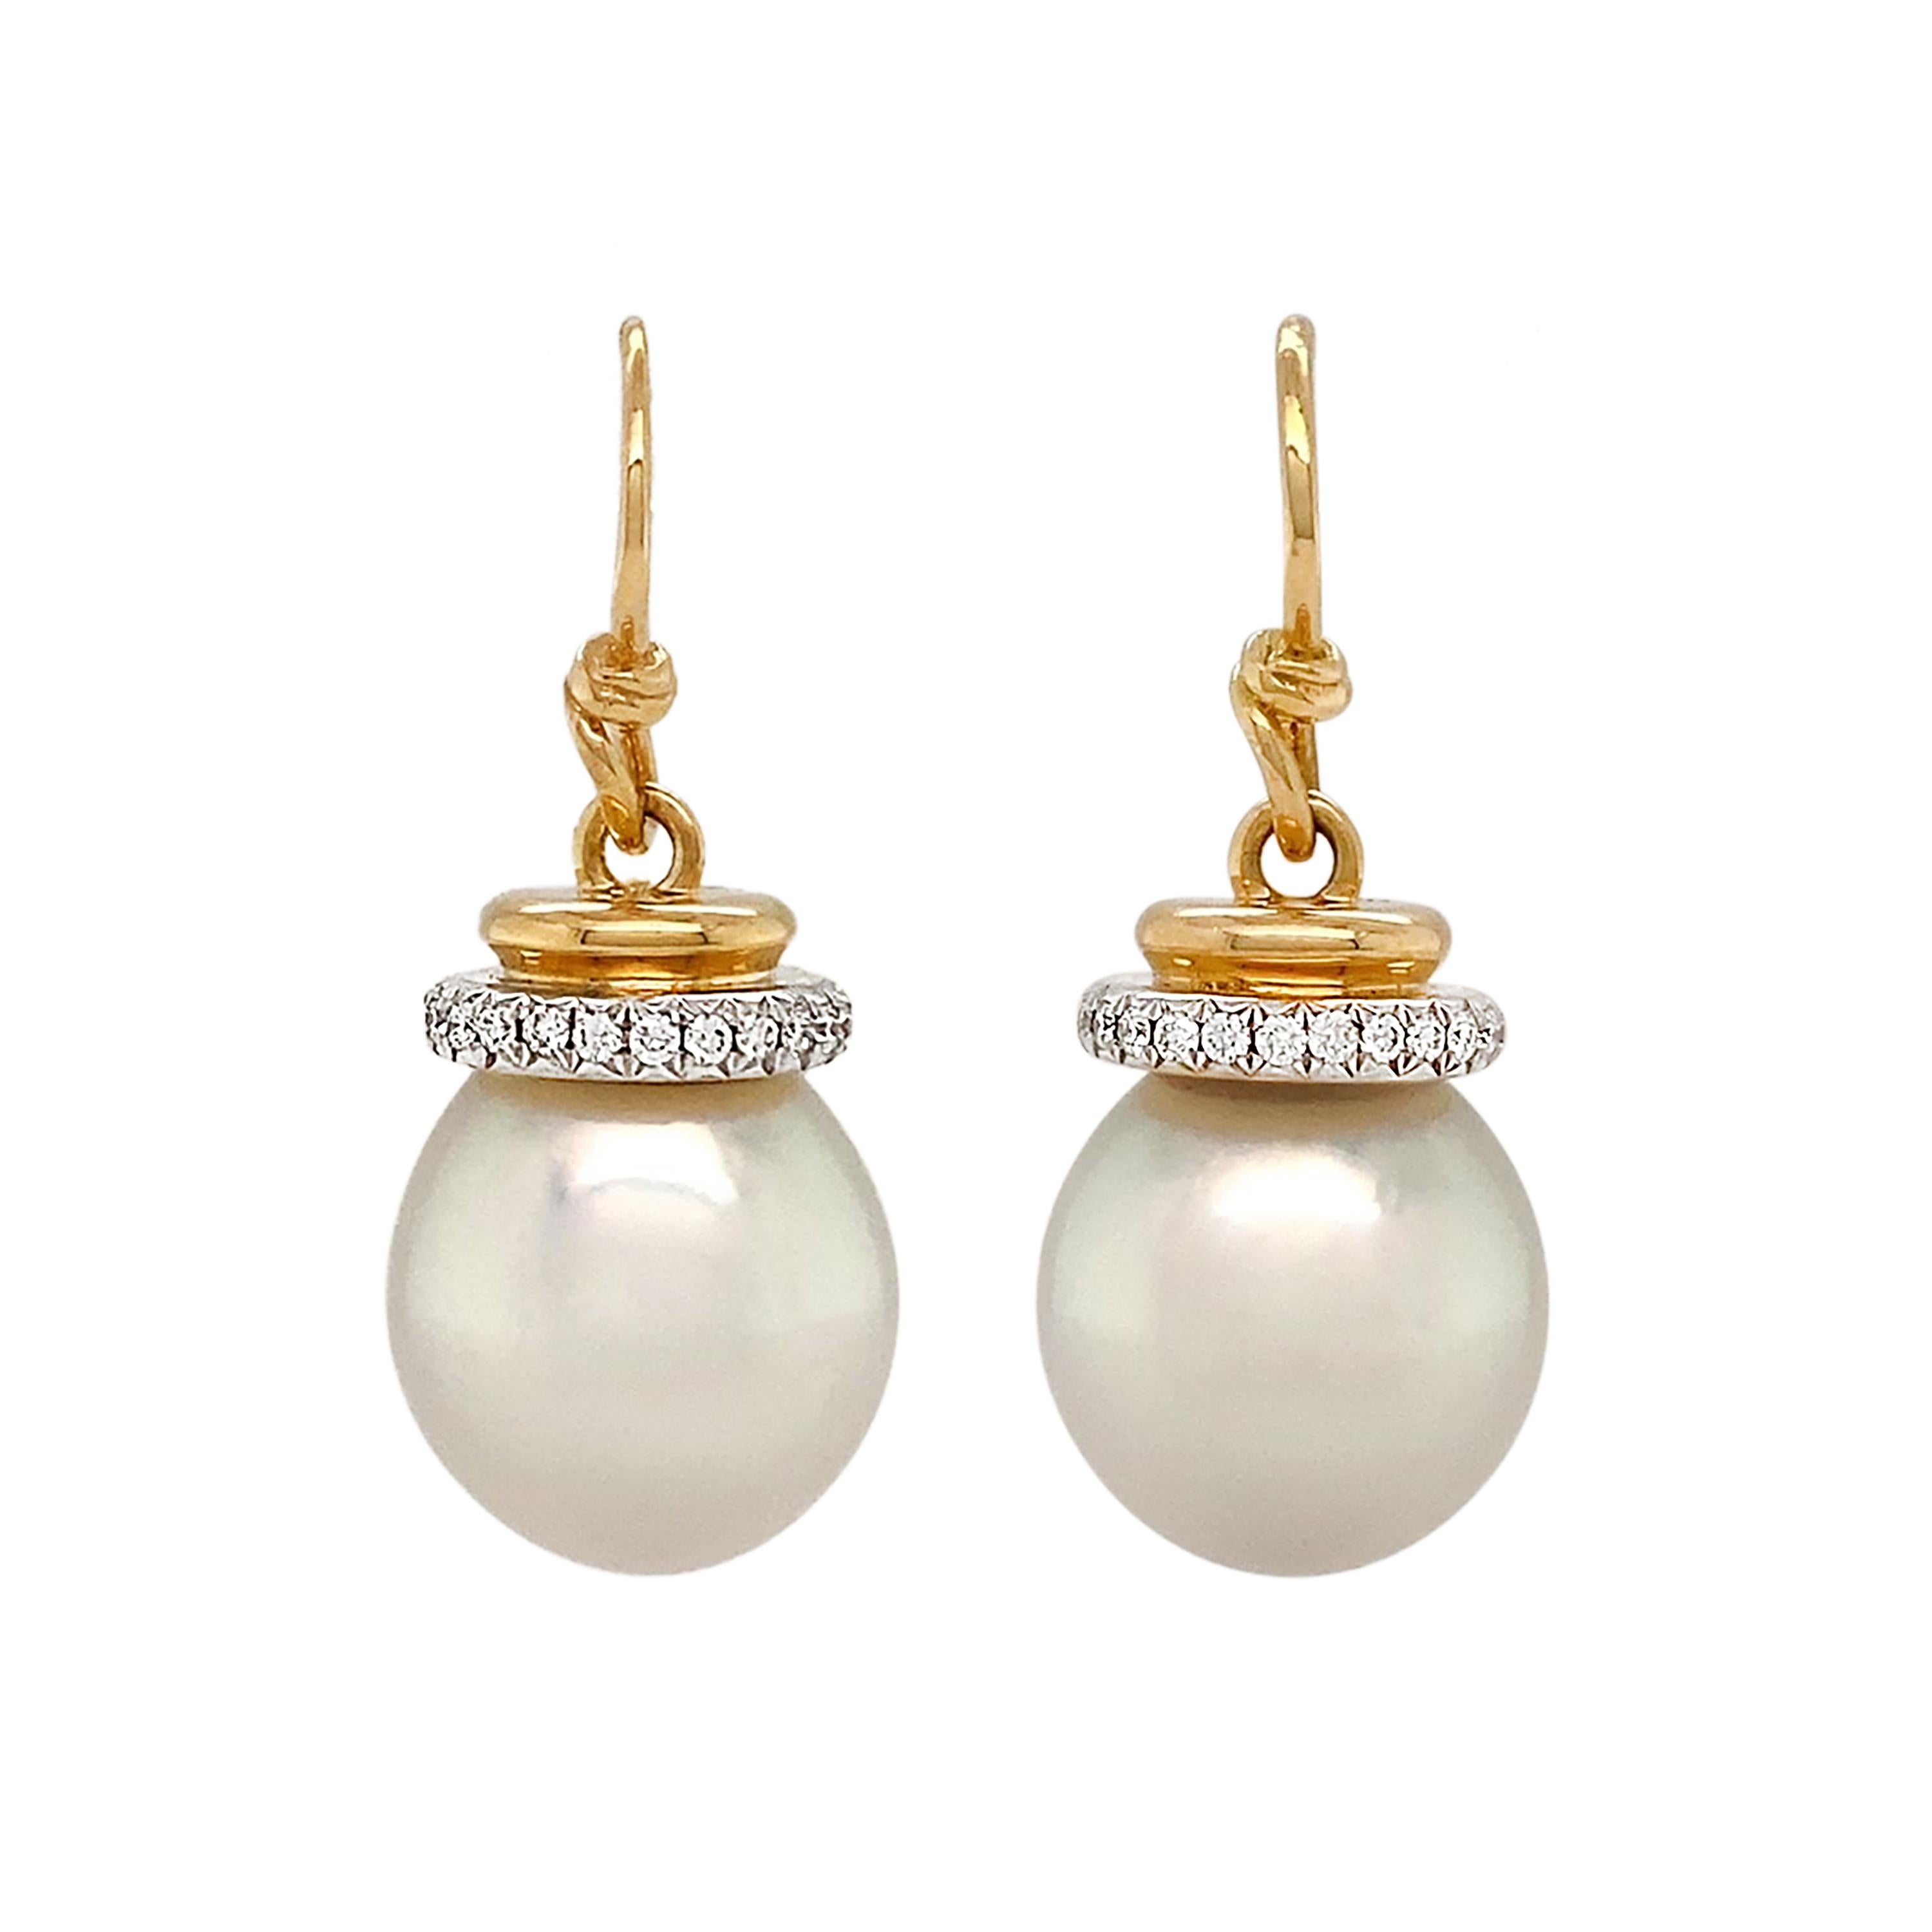 Elegance is emitted in the form of diamonds and pearls. 18k yellow gold French hooks suspend a polished gold cap trimmed with brilliant cut diamonds. The cap secures a single white south sea pearl, releasing a soft prismatic array as the light falls